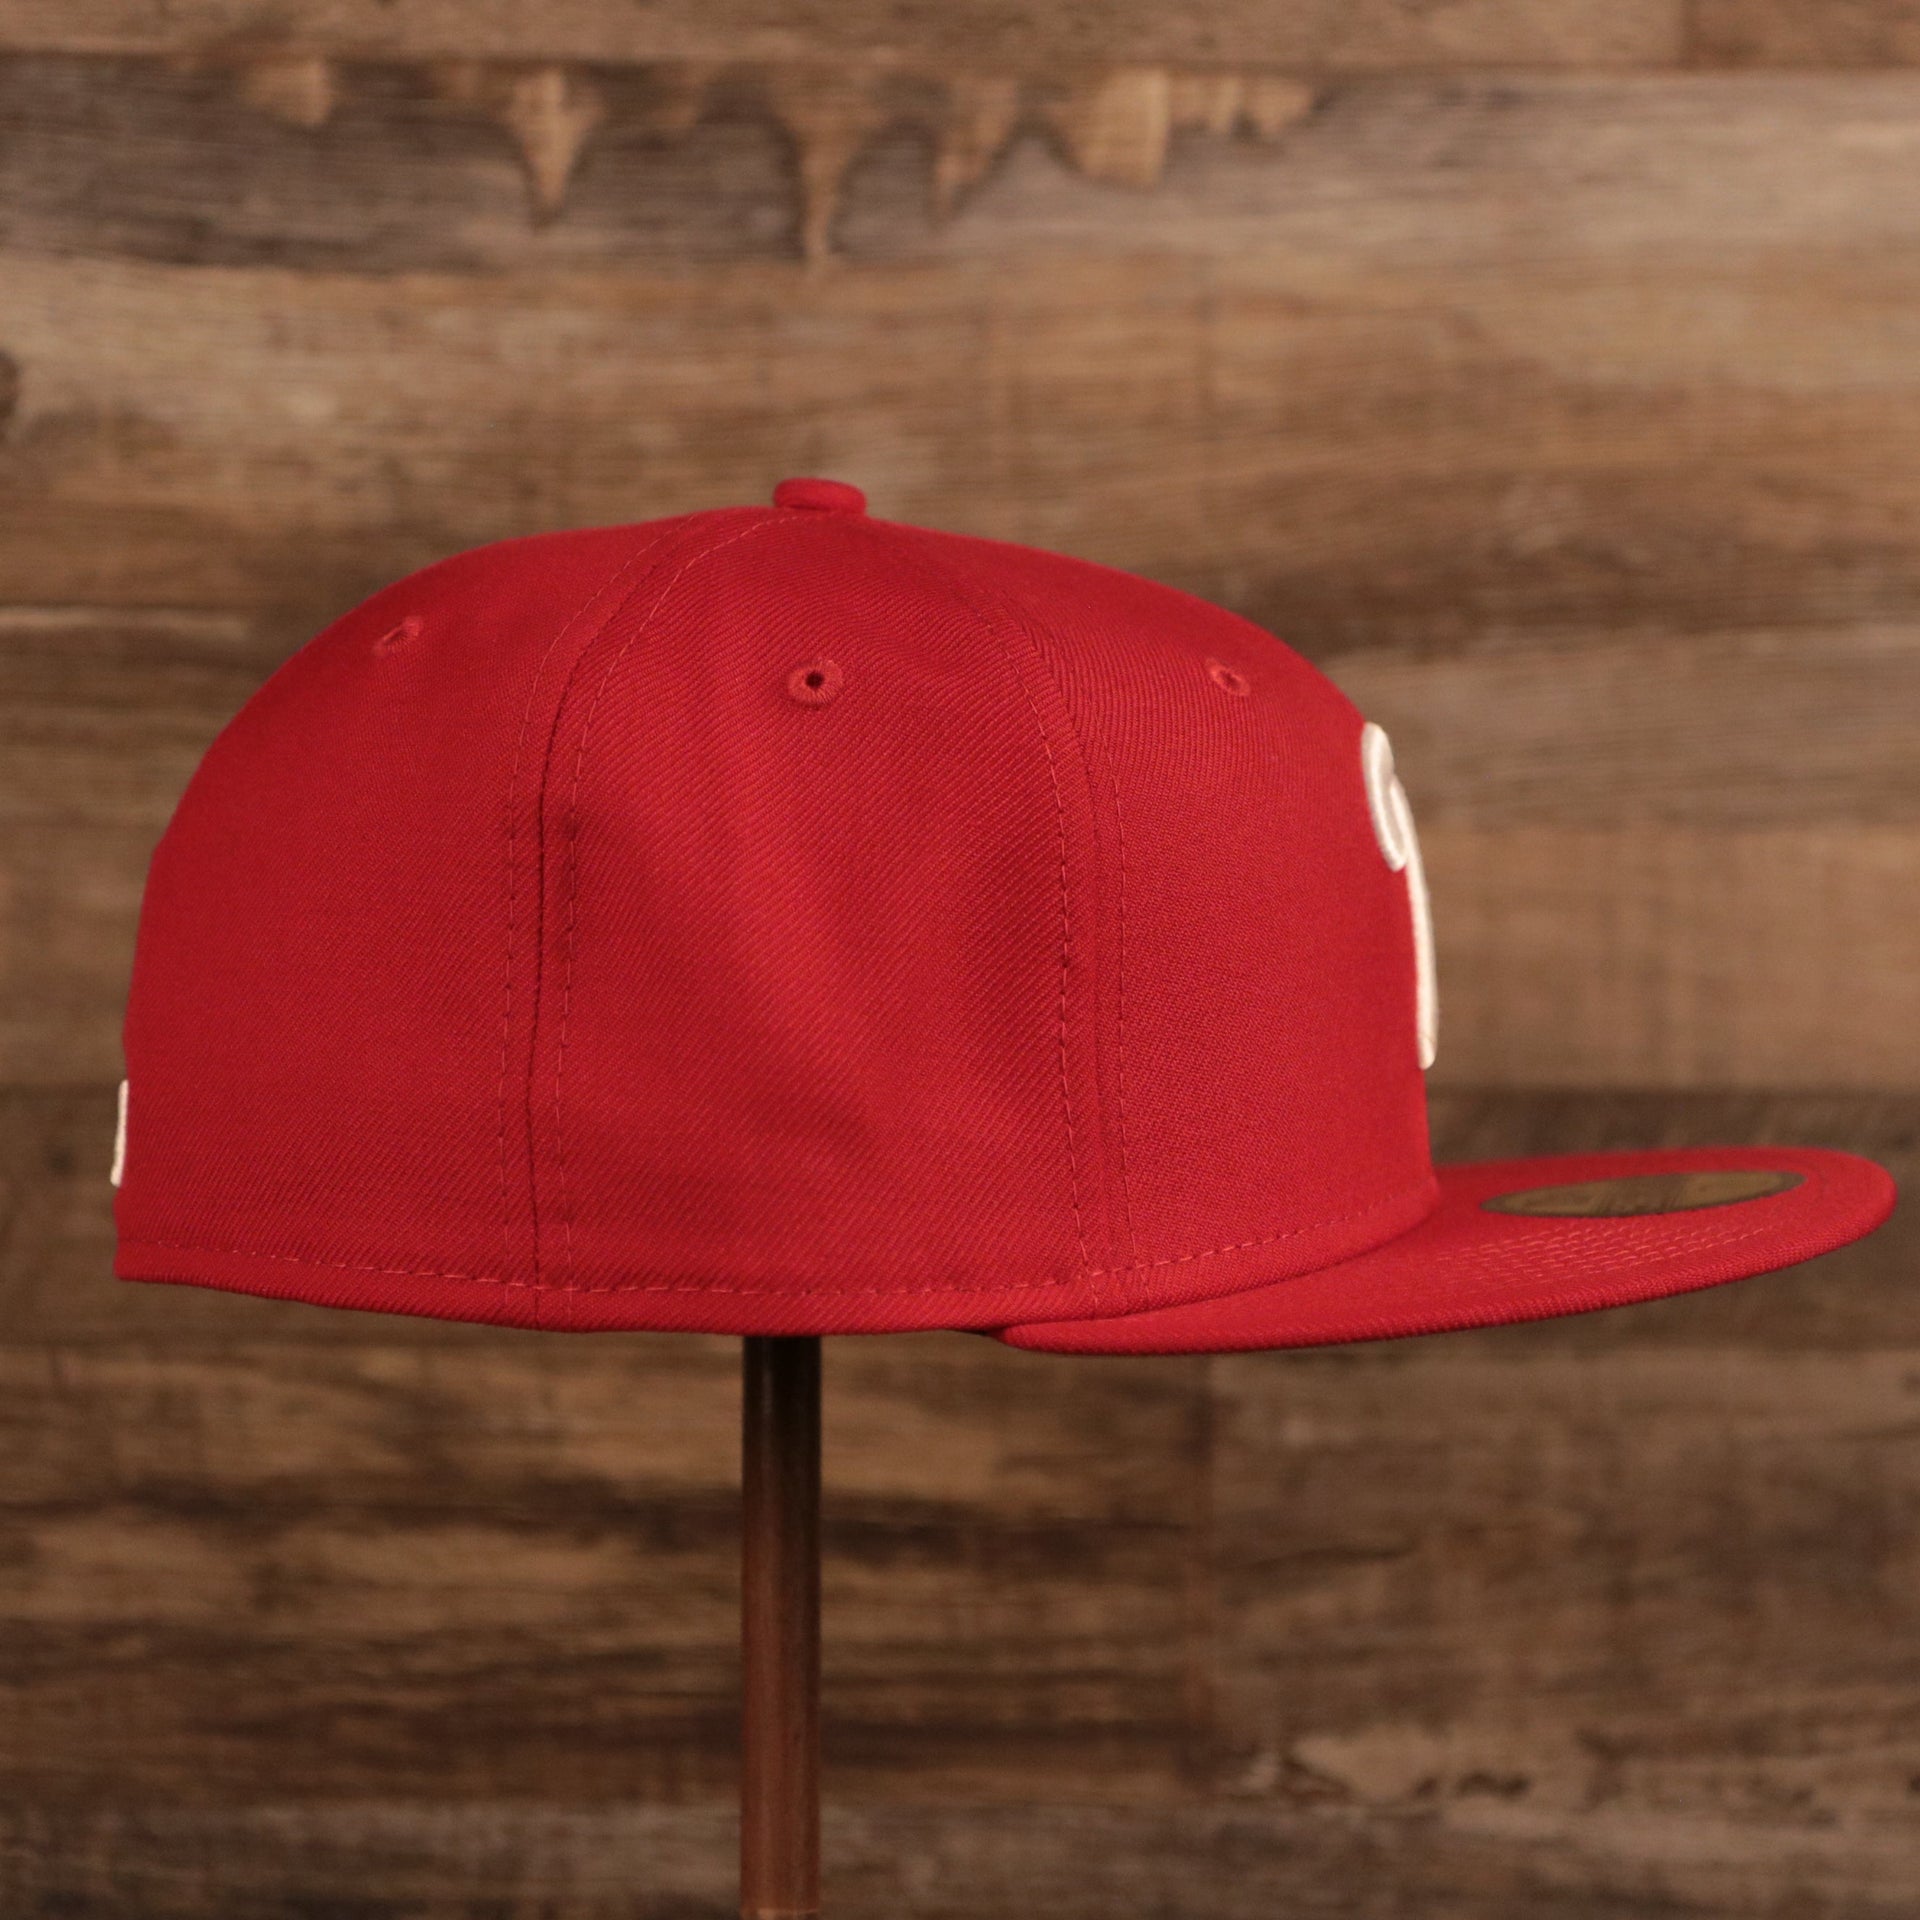 The wearer's right side of the red Philadelphia Phillies Philly Cheesesteak side patch fitted hat.